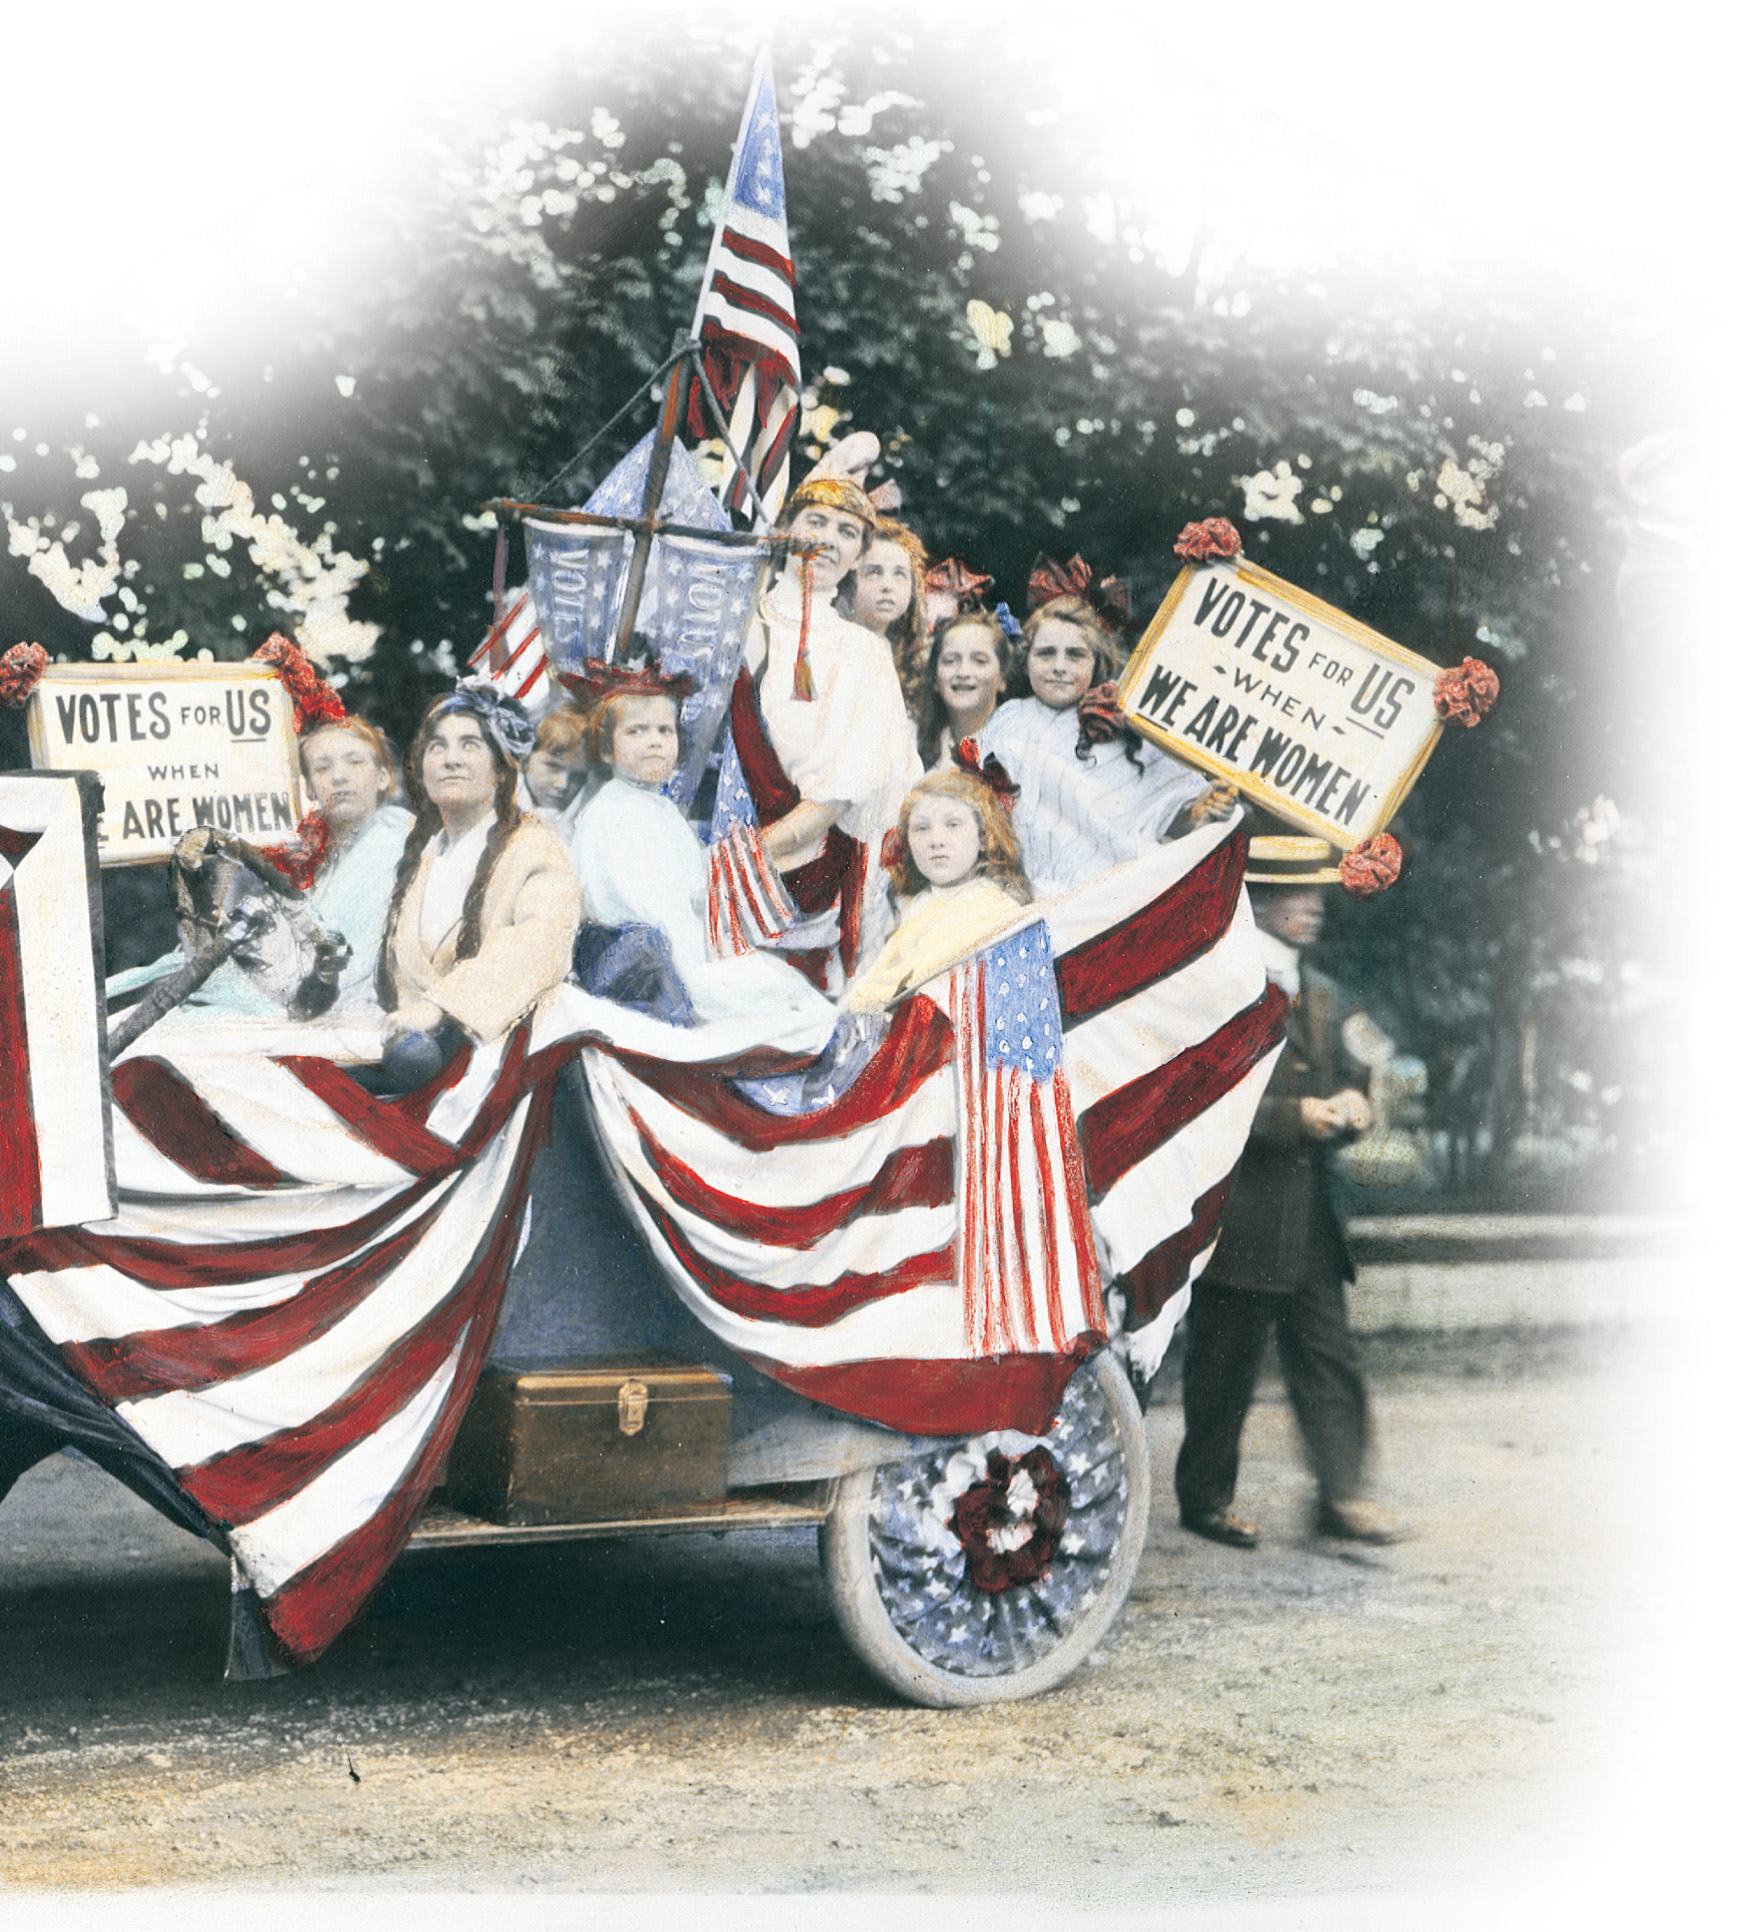 Women holding signs reading 'Votes for US When We are Women' ride in a car decorated with American flags and red, white and blue bunting.